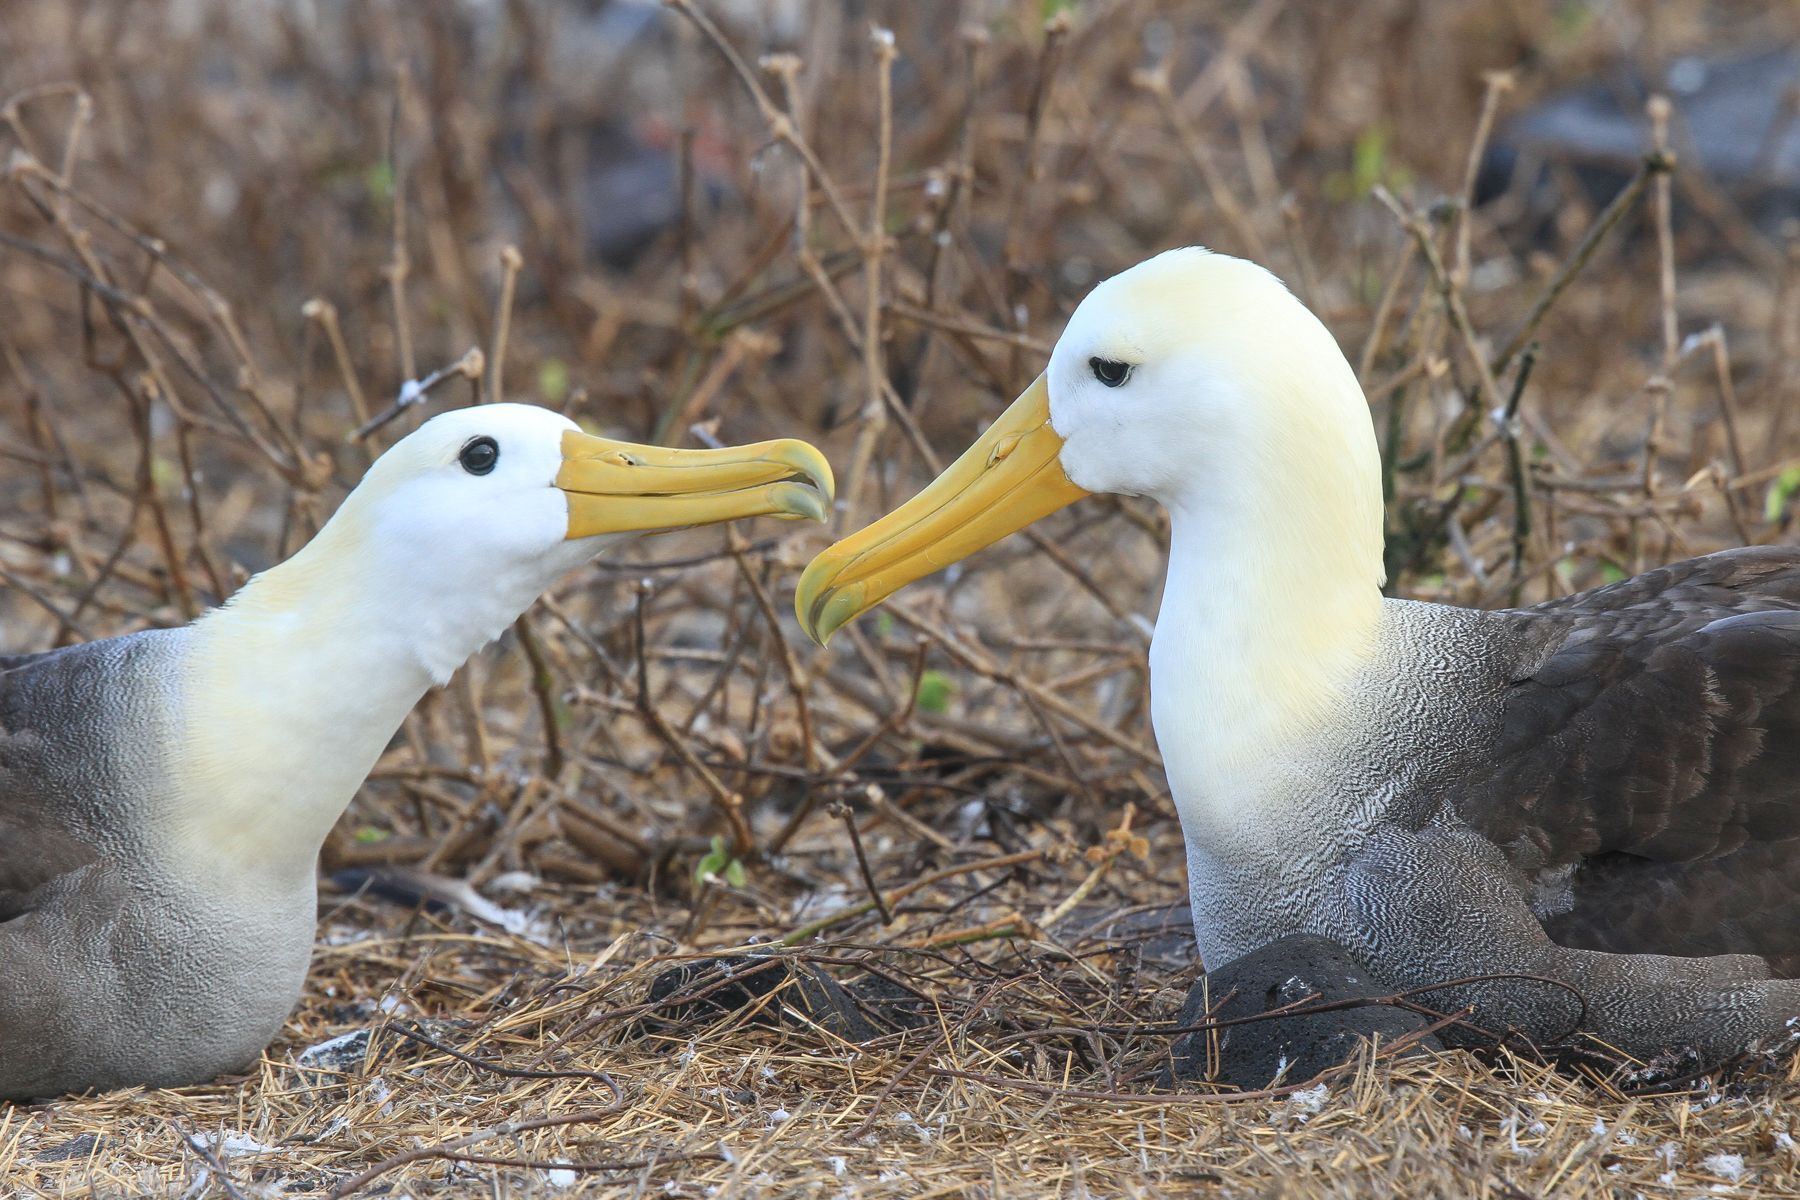 As with all albatrosses, there are affectionate greetings between pairs